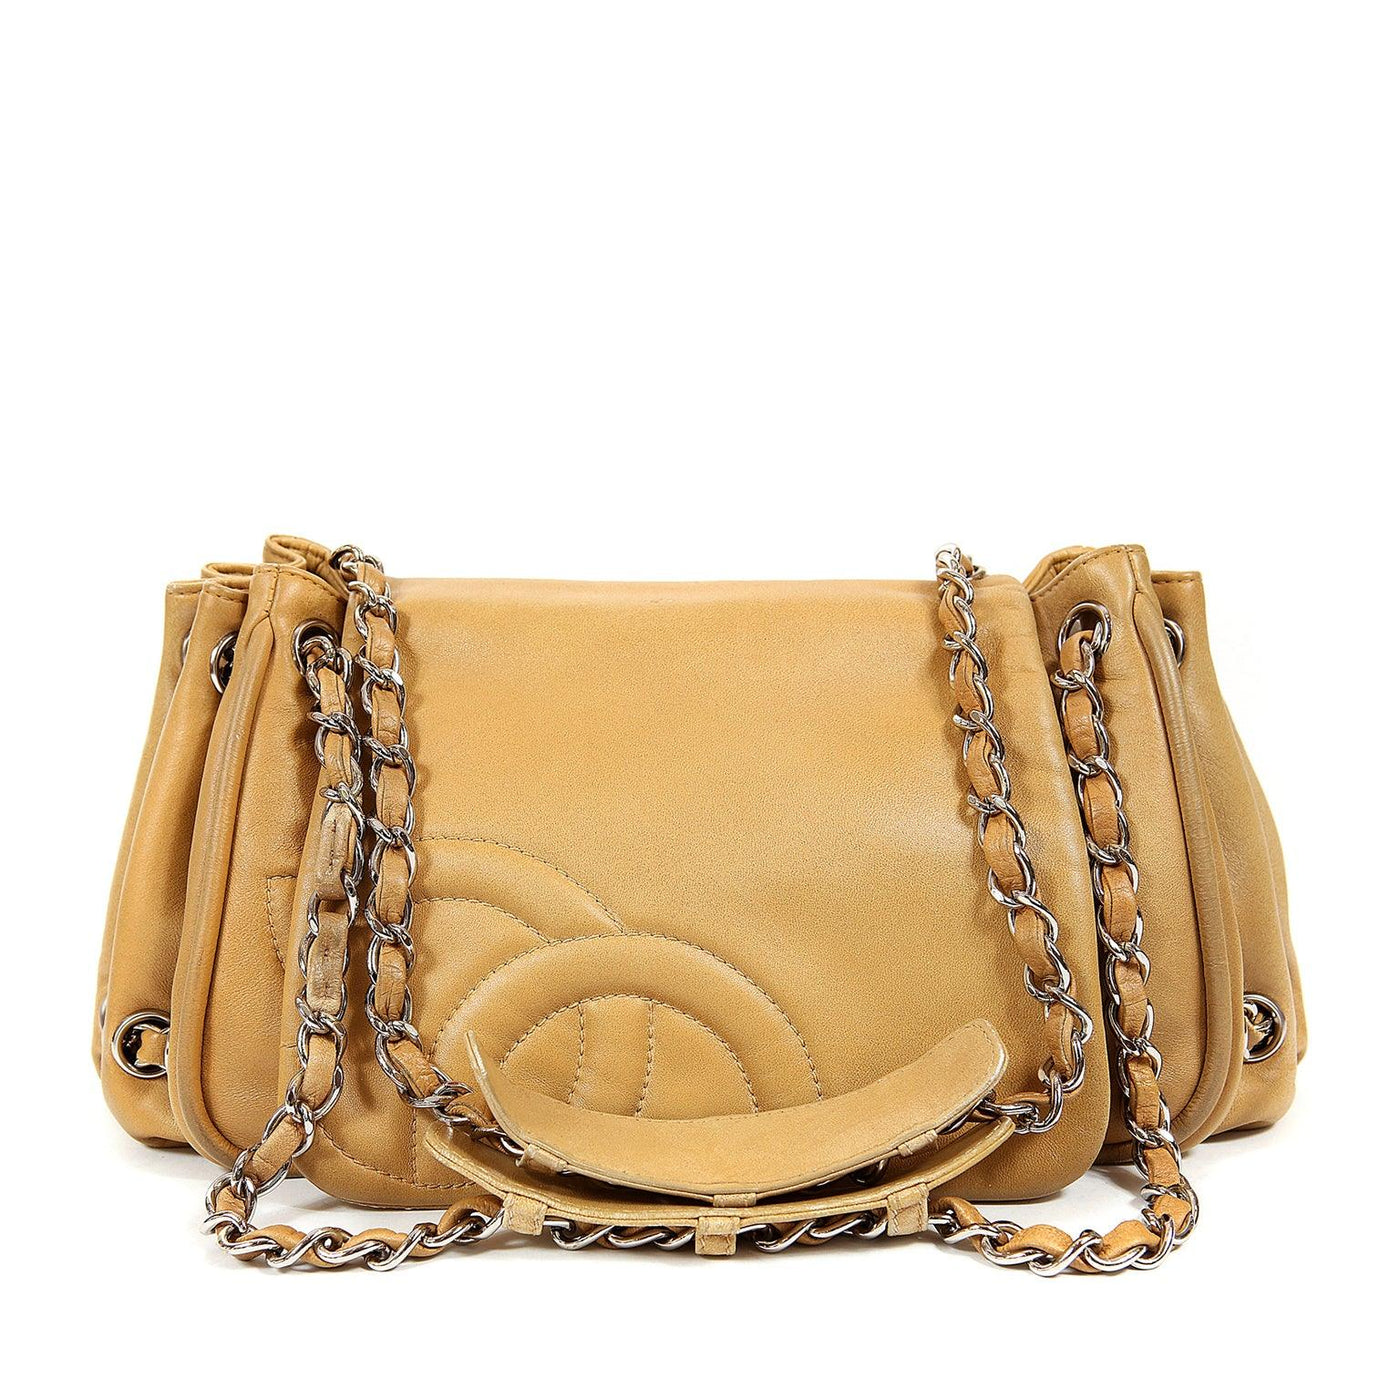 Chanel Beige Leather Accordion Flap Bag - Only Authentics